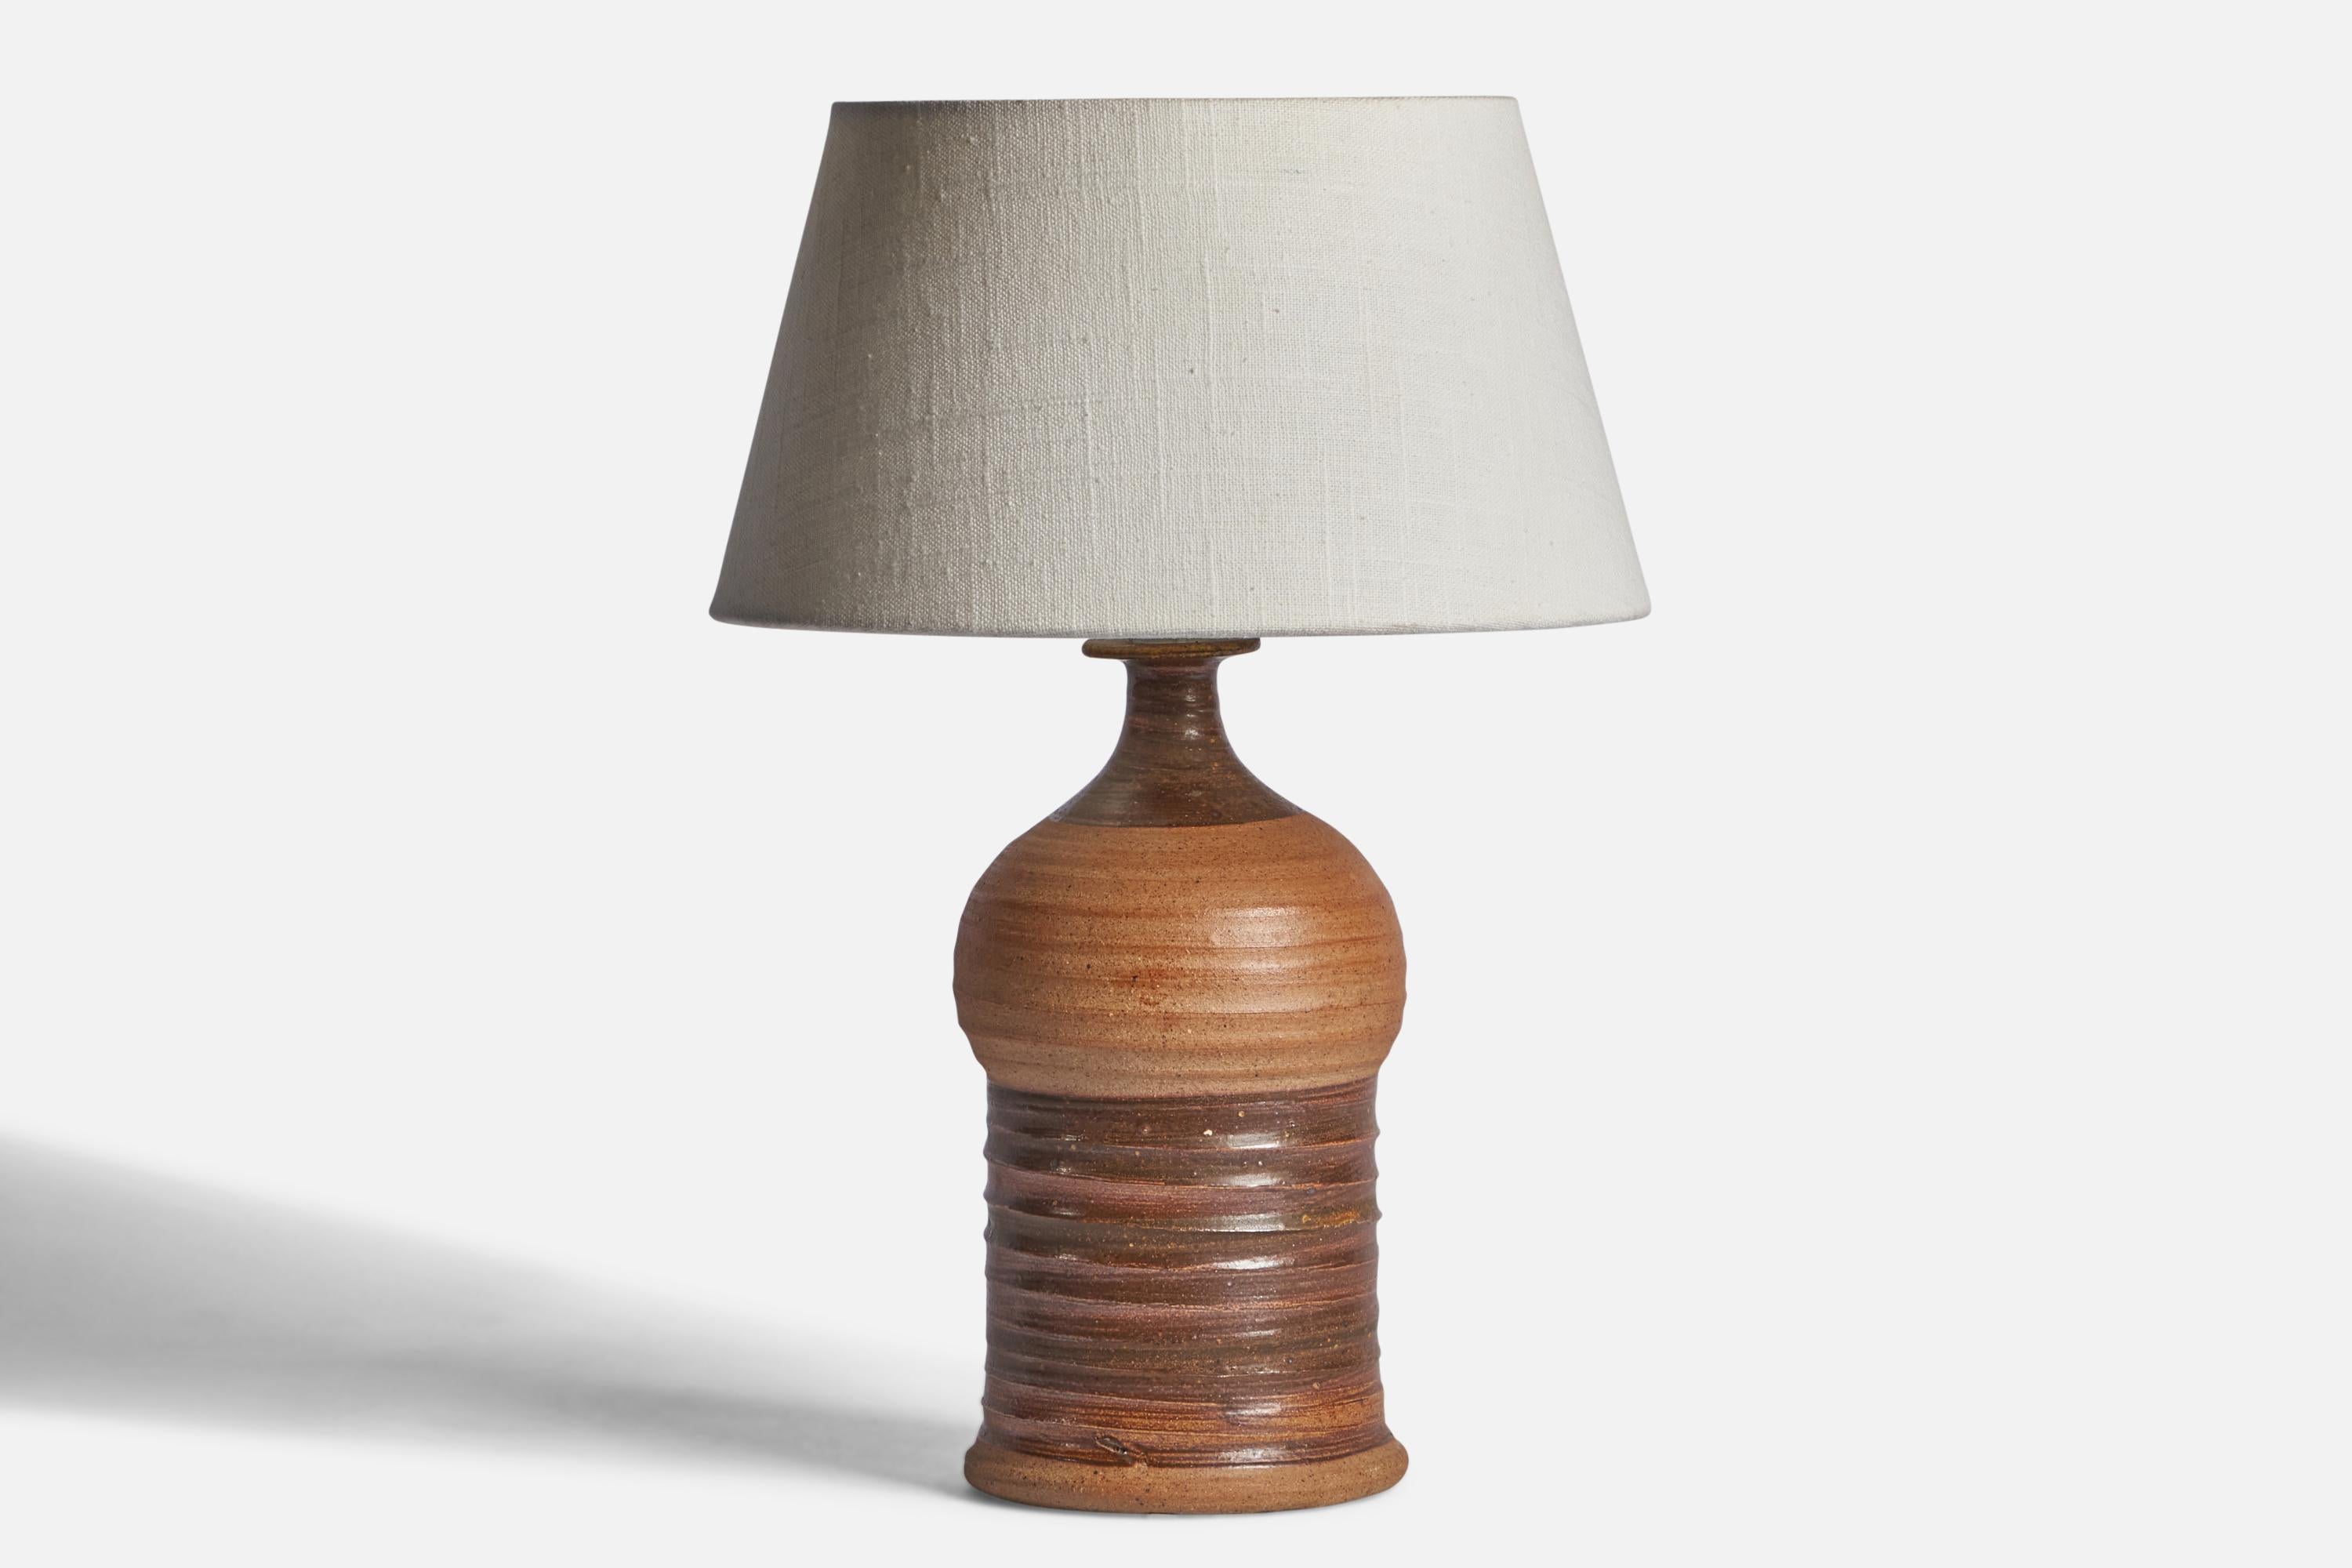 A brown-glazed stoneware table lamp designed and produced in Denmark, c. 1950s.

Dimensions of Lamp (inches): 11.65” H x 4.80” Diameter
Dimensions of Shade (inches): 7” Top Diameter x 10” Bottom Diameter x 5.5” H 
Dimensions of Lamp with Shade